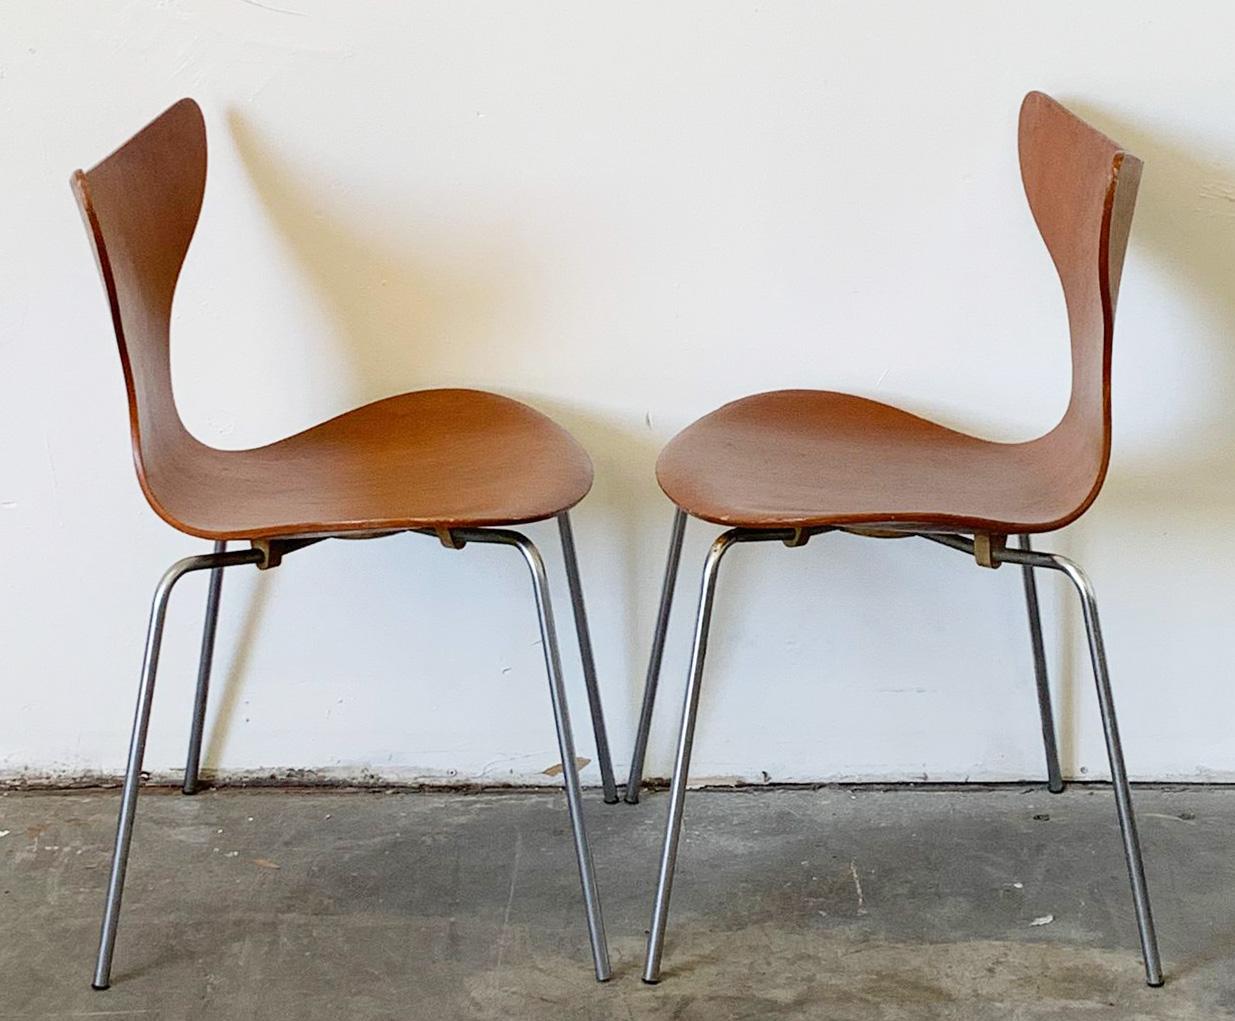 Bentwood Rare Early Arne Jacobsen Lily Chairs, Fritz Hansen, 1969, a Pair